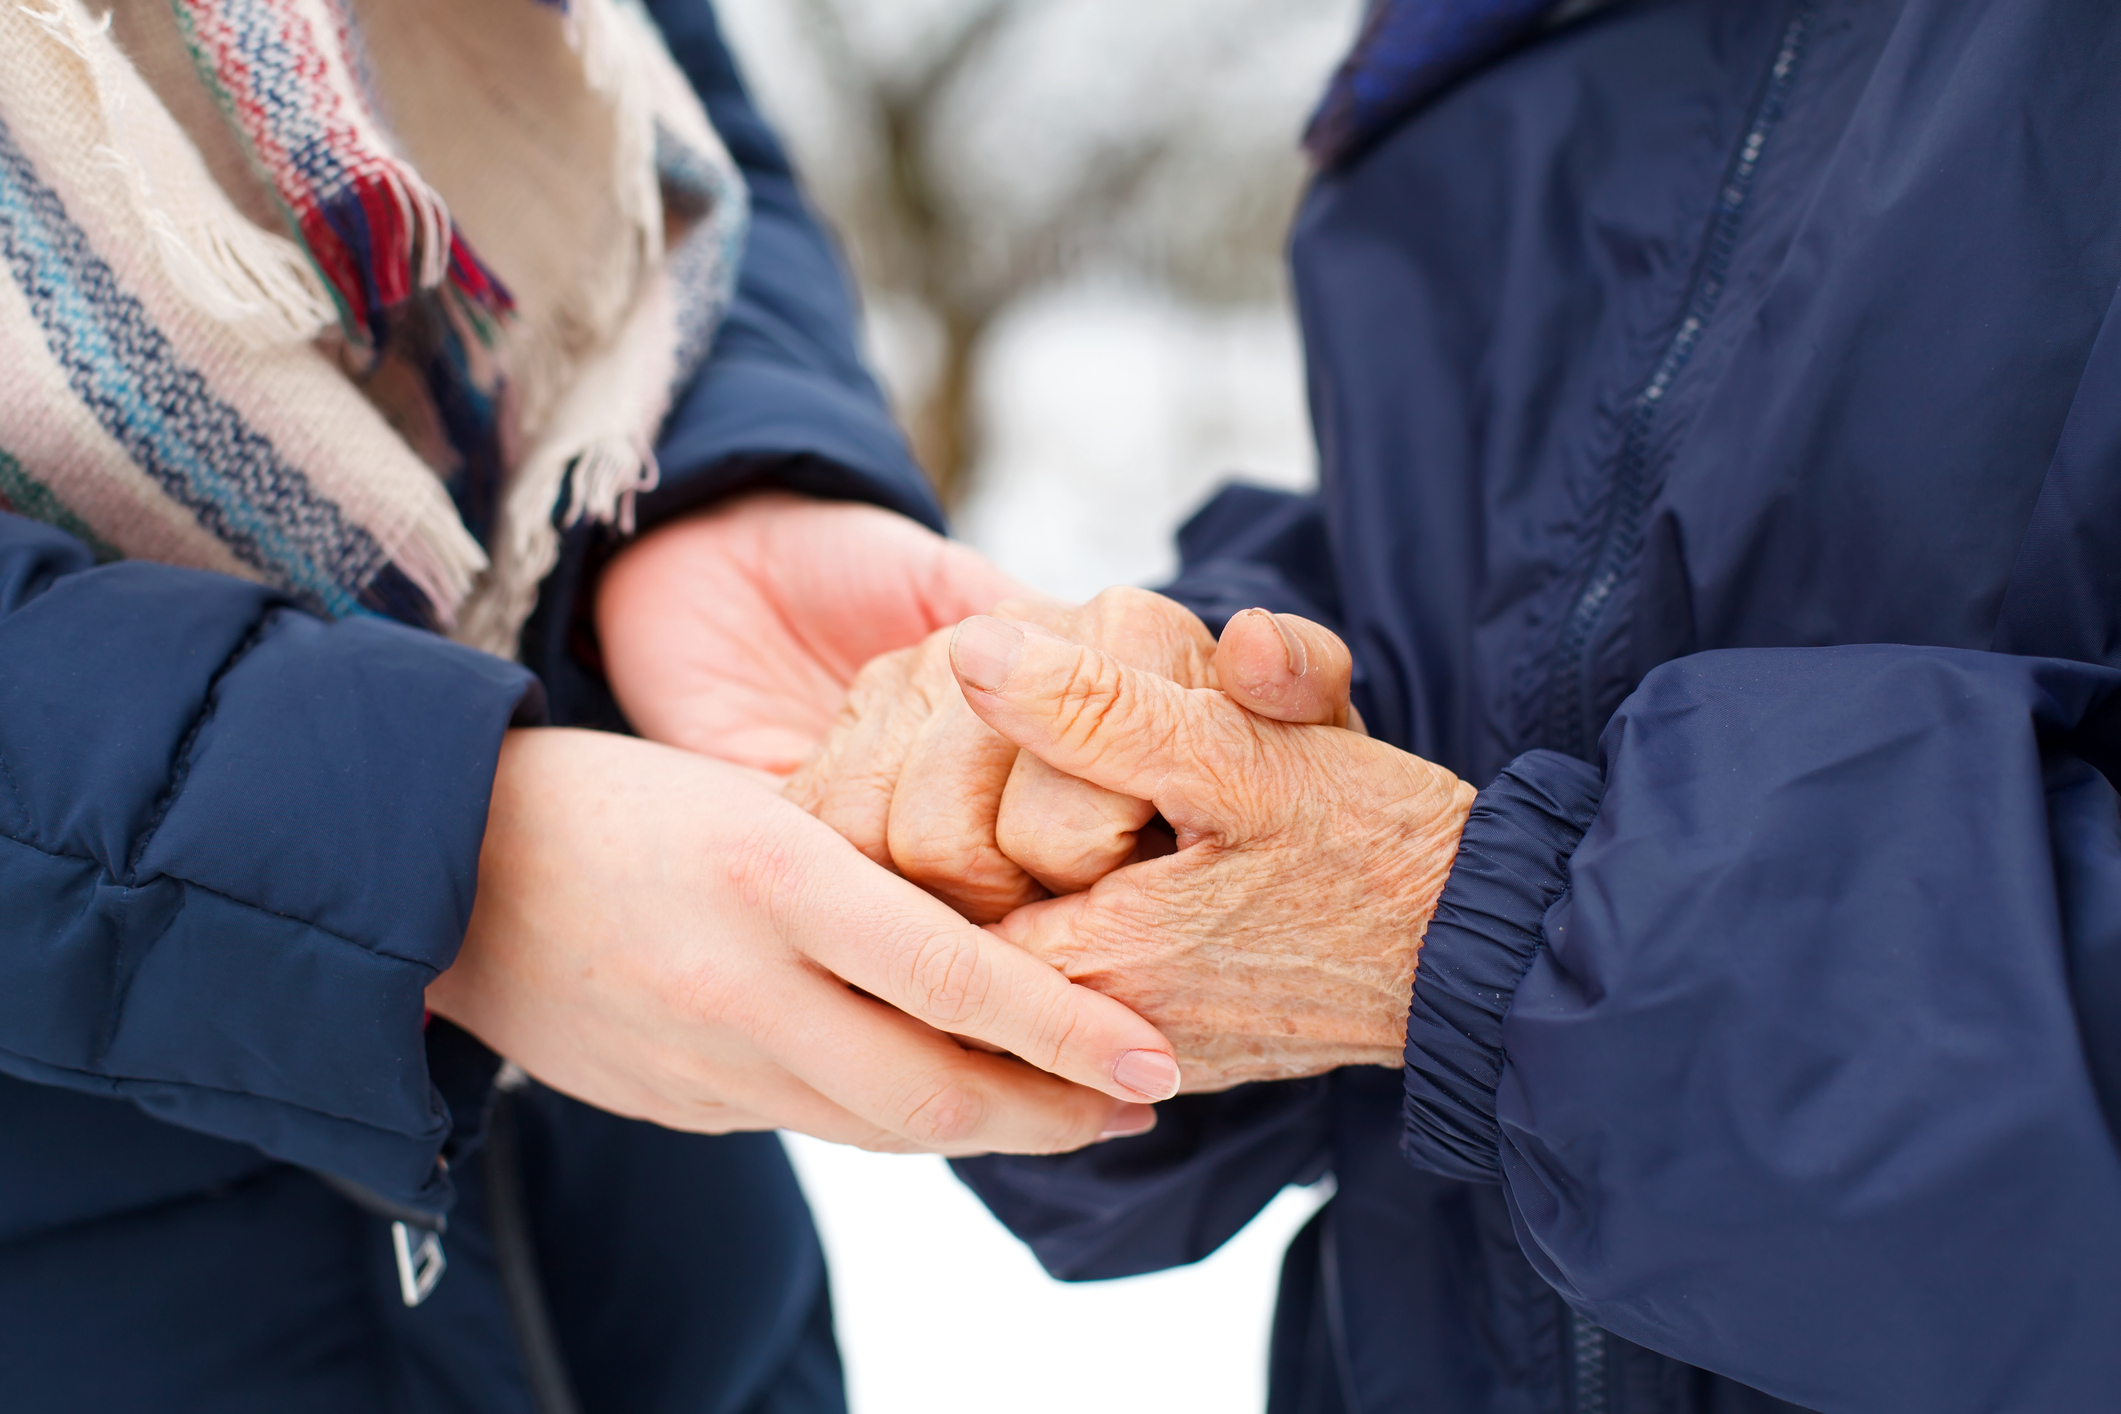 A closeup of two white women's hands, one old and one young, clasped together against a wintry backdrop of snow and blue coats